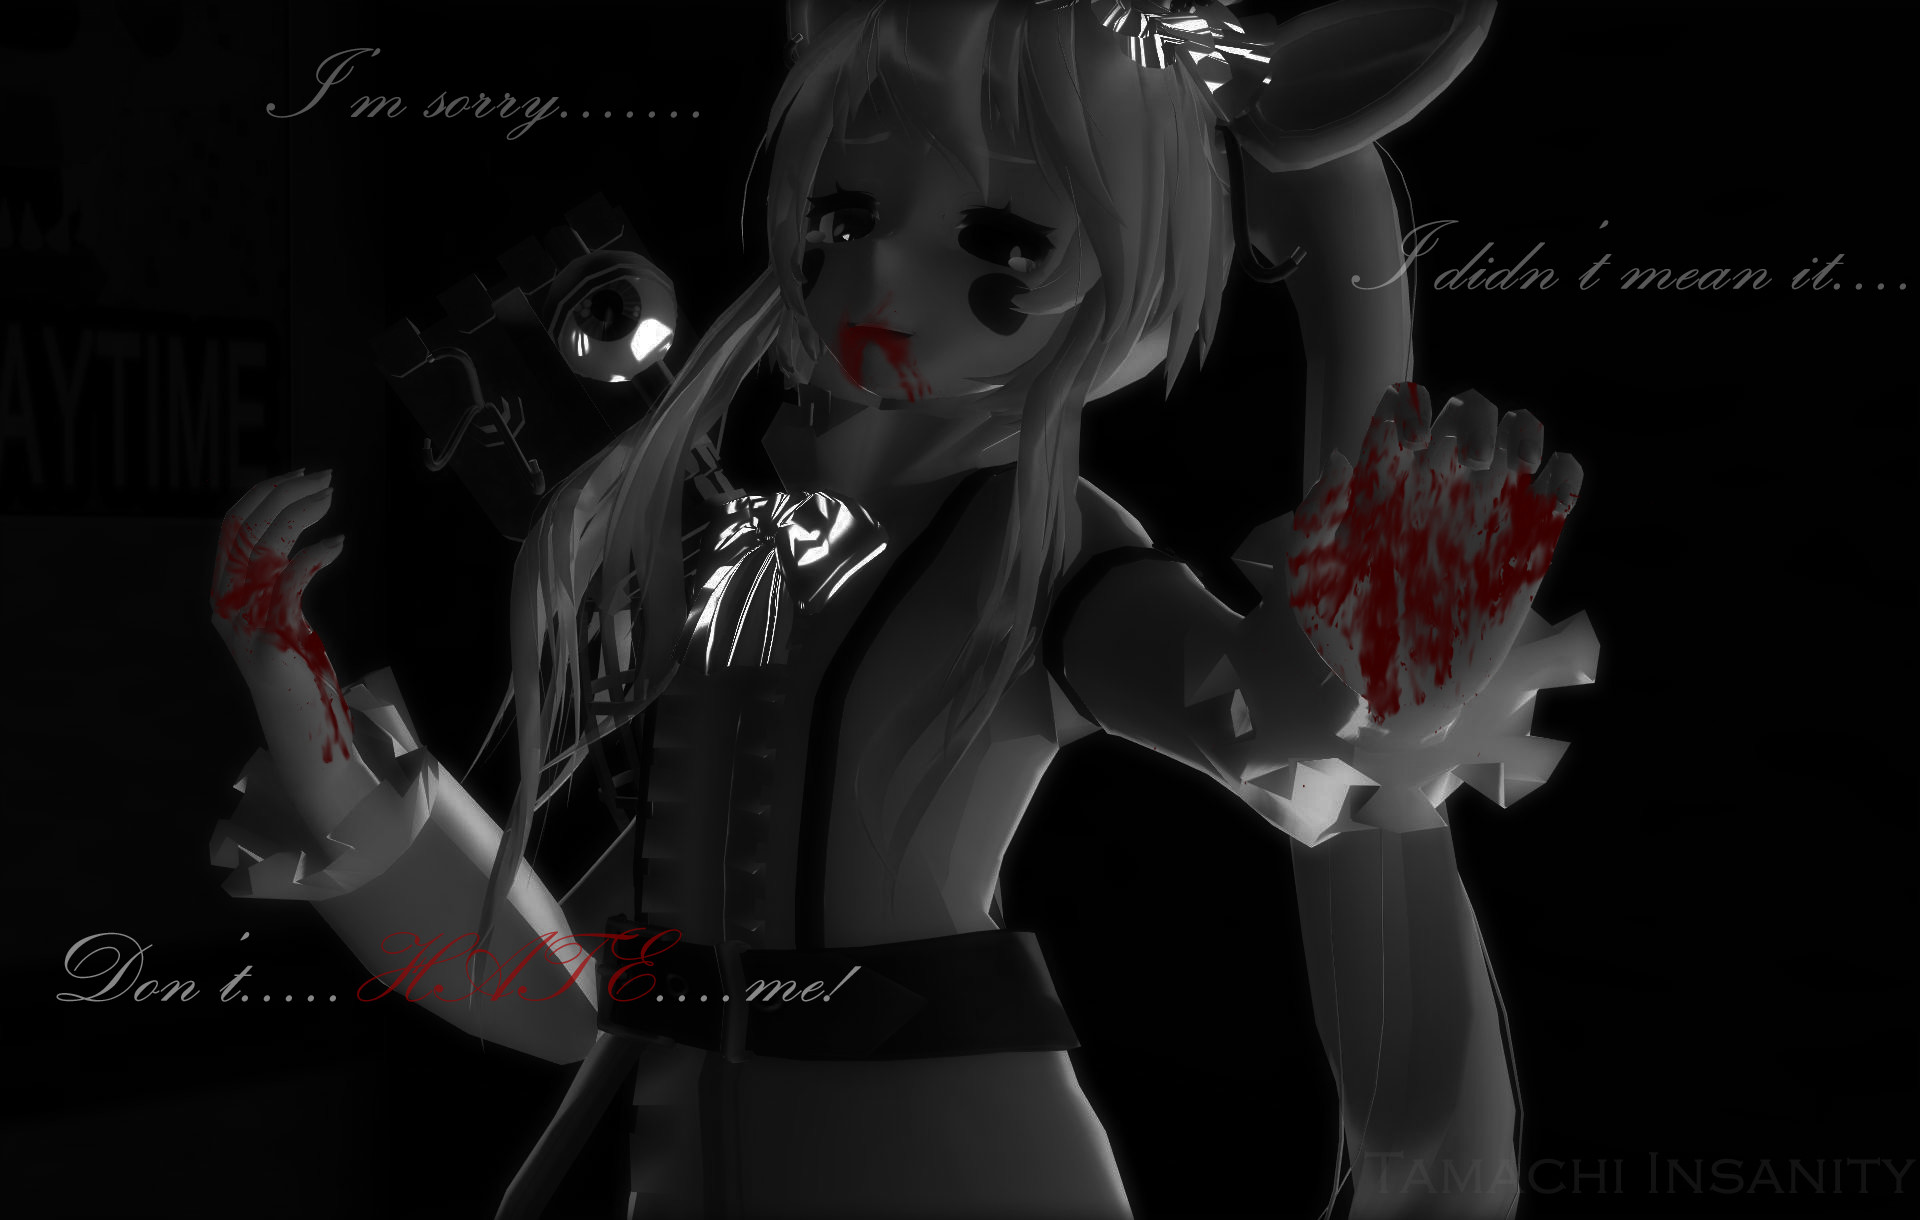 1920x1220 Foxy2024 images mmd x fnaf mangle i m sorry Von tamachi insanity d8mdlvu HD  wallpaper and background photos